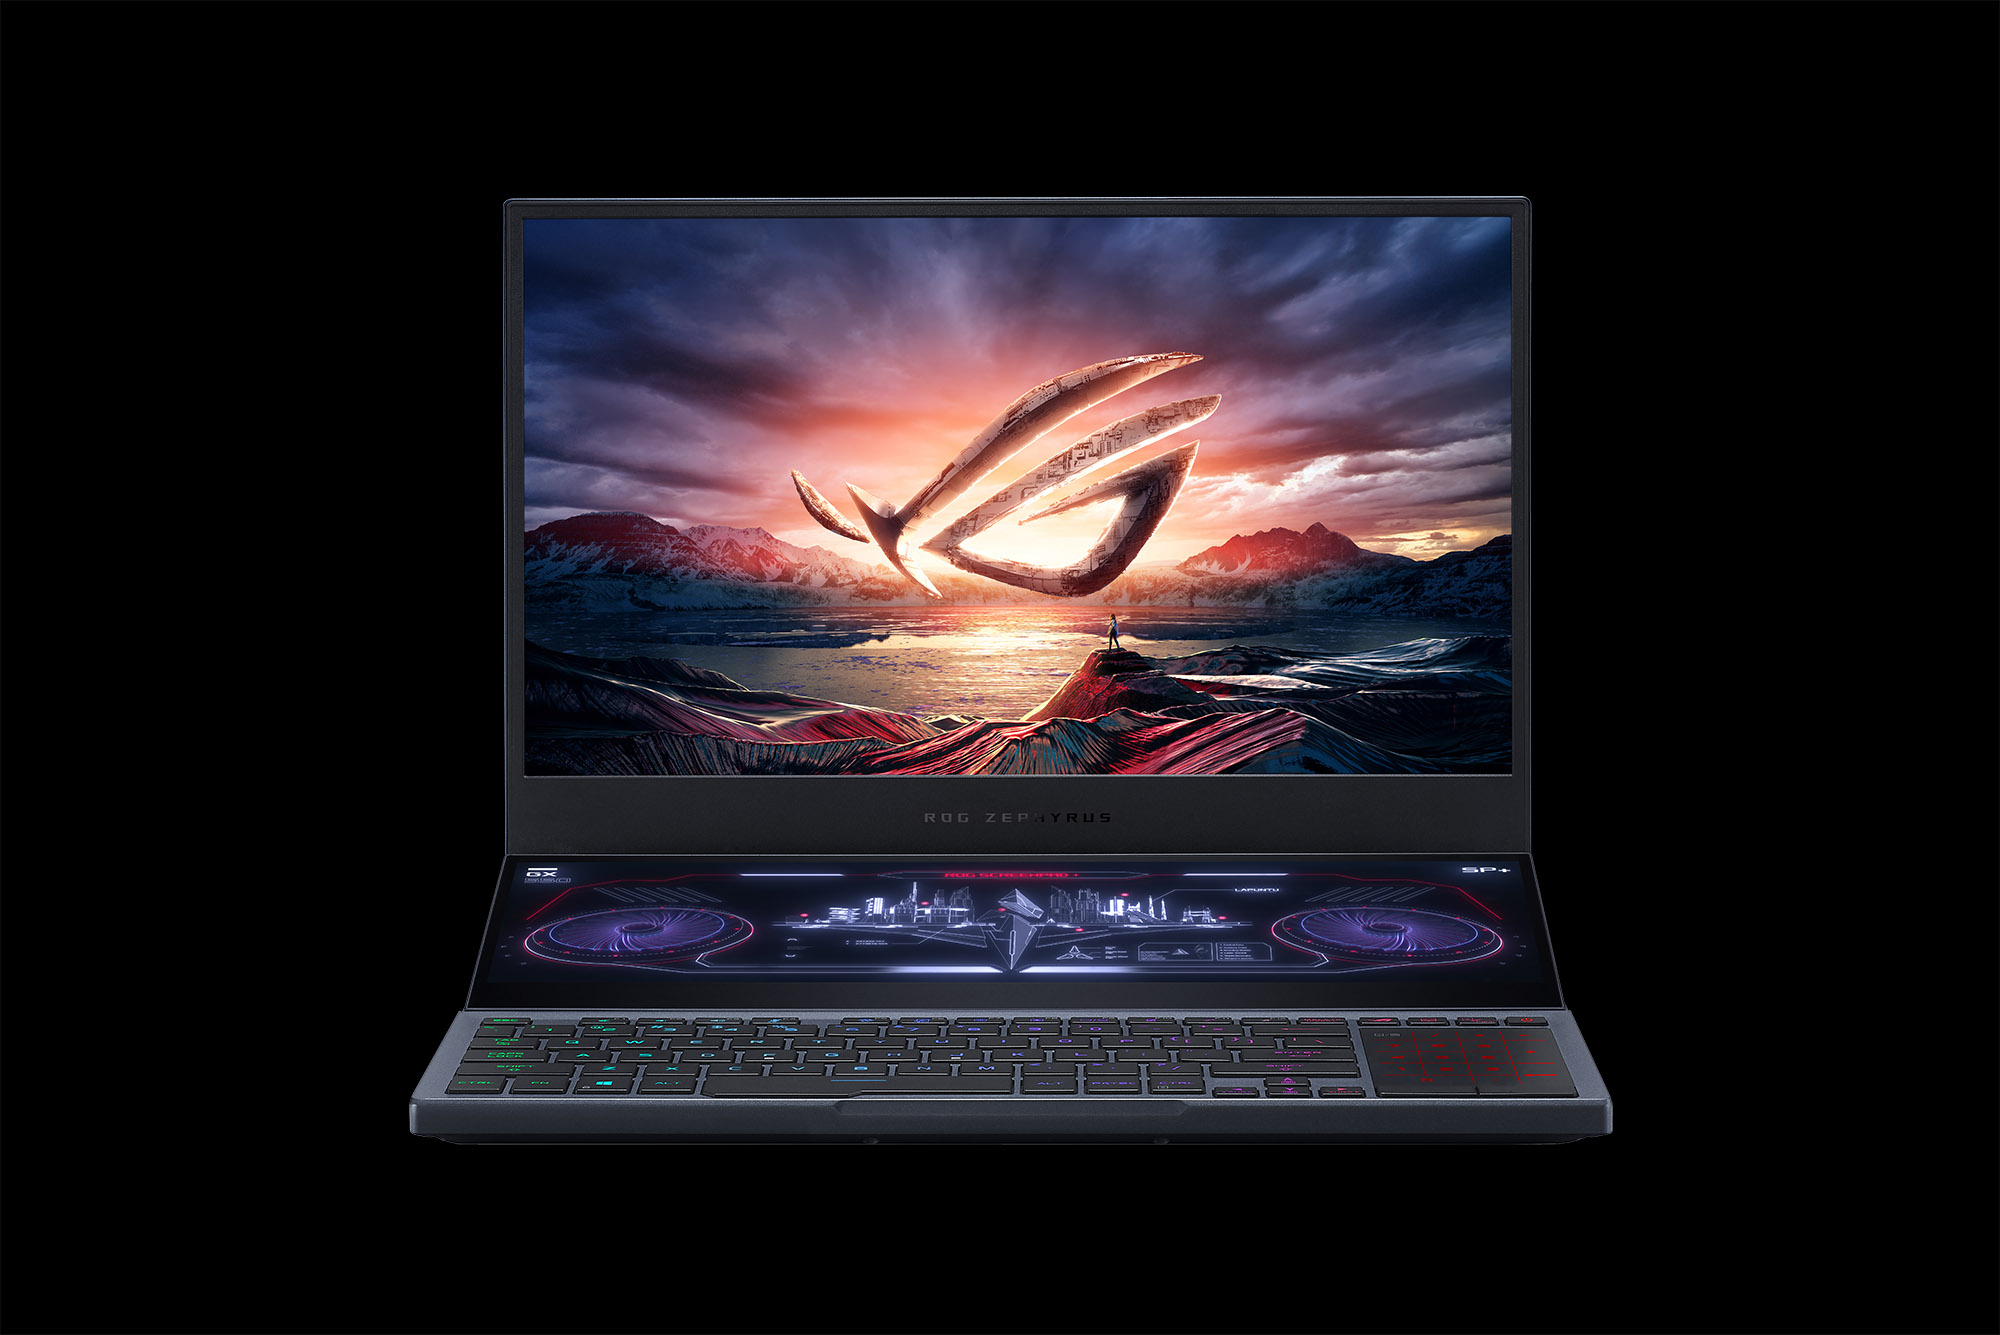 Hands-on: The ROG Azoth became the canvas for the keyboard of my dreams